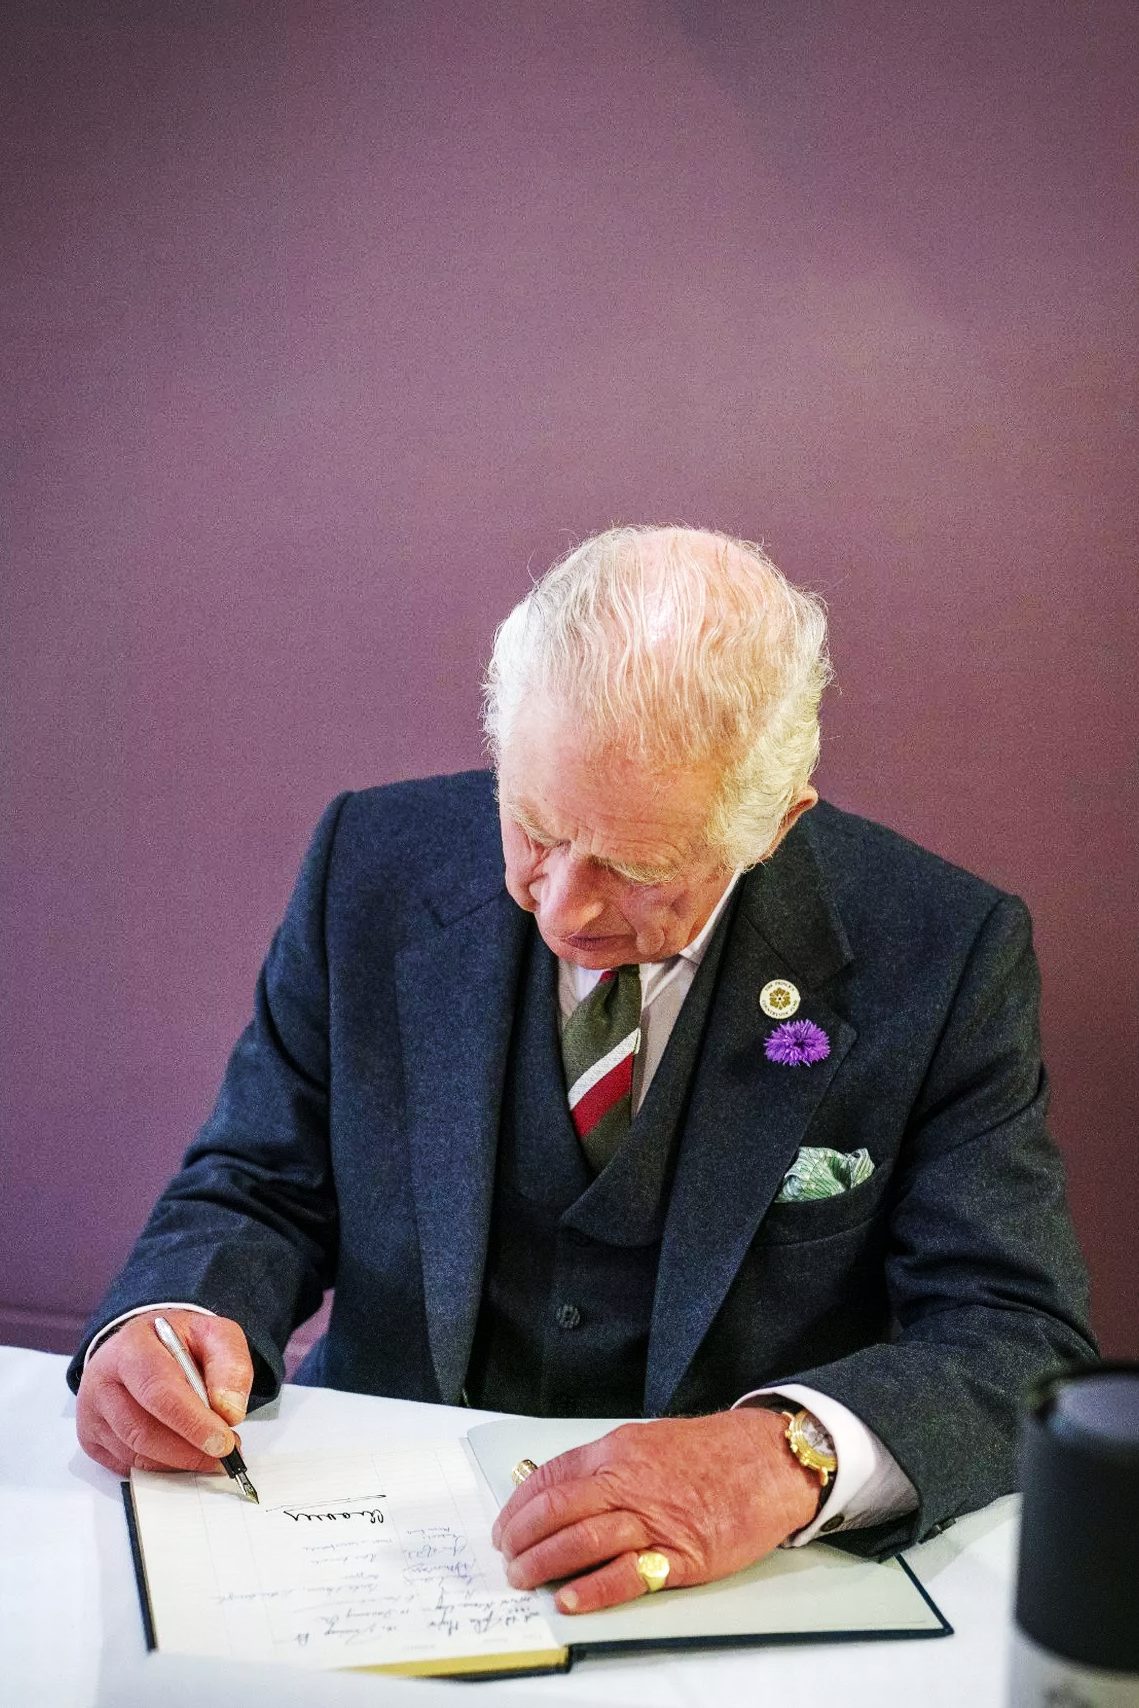 A photograph of King Charles sitting at a desk and signing a book using a fountain pen.